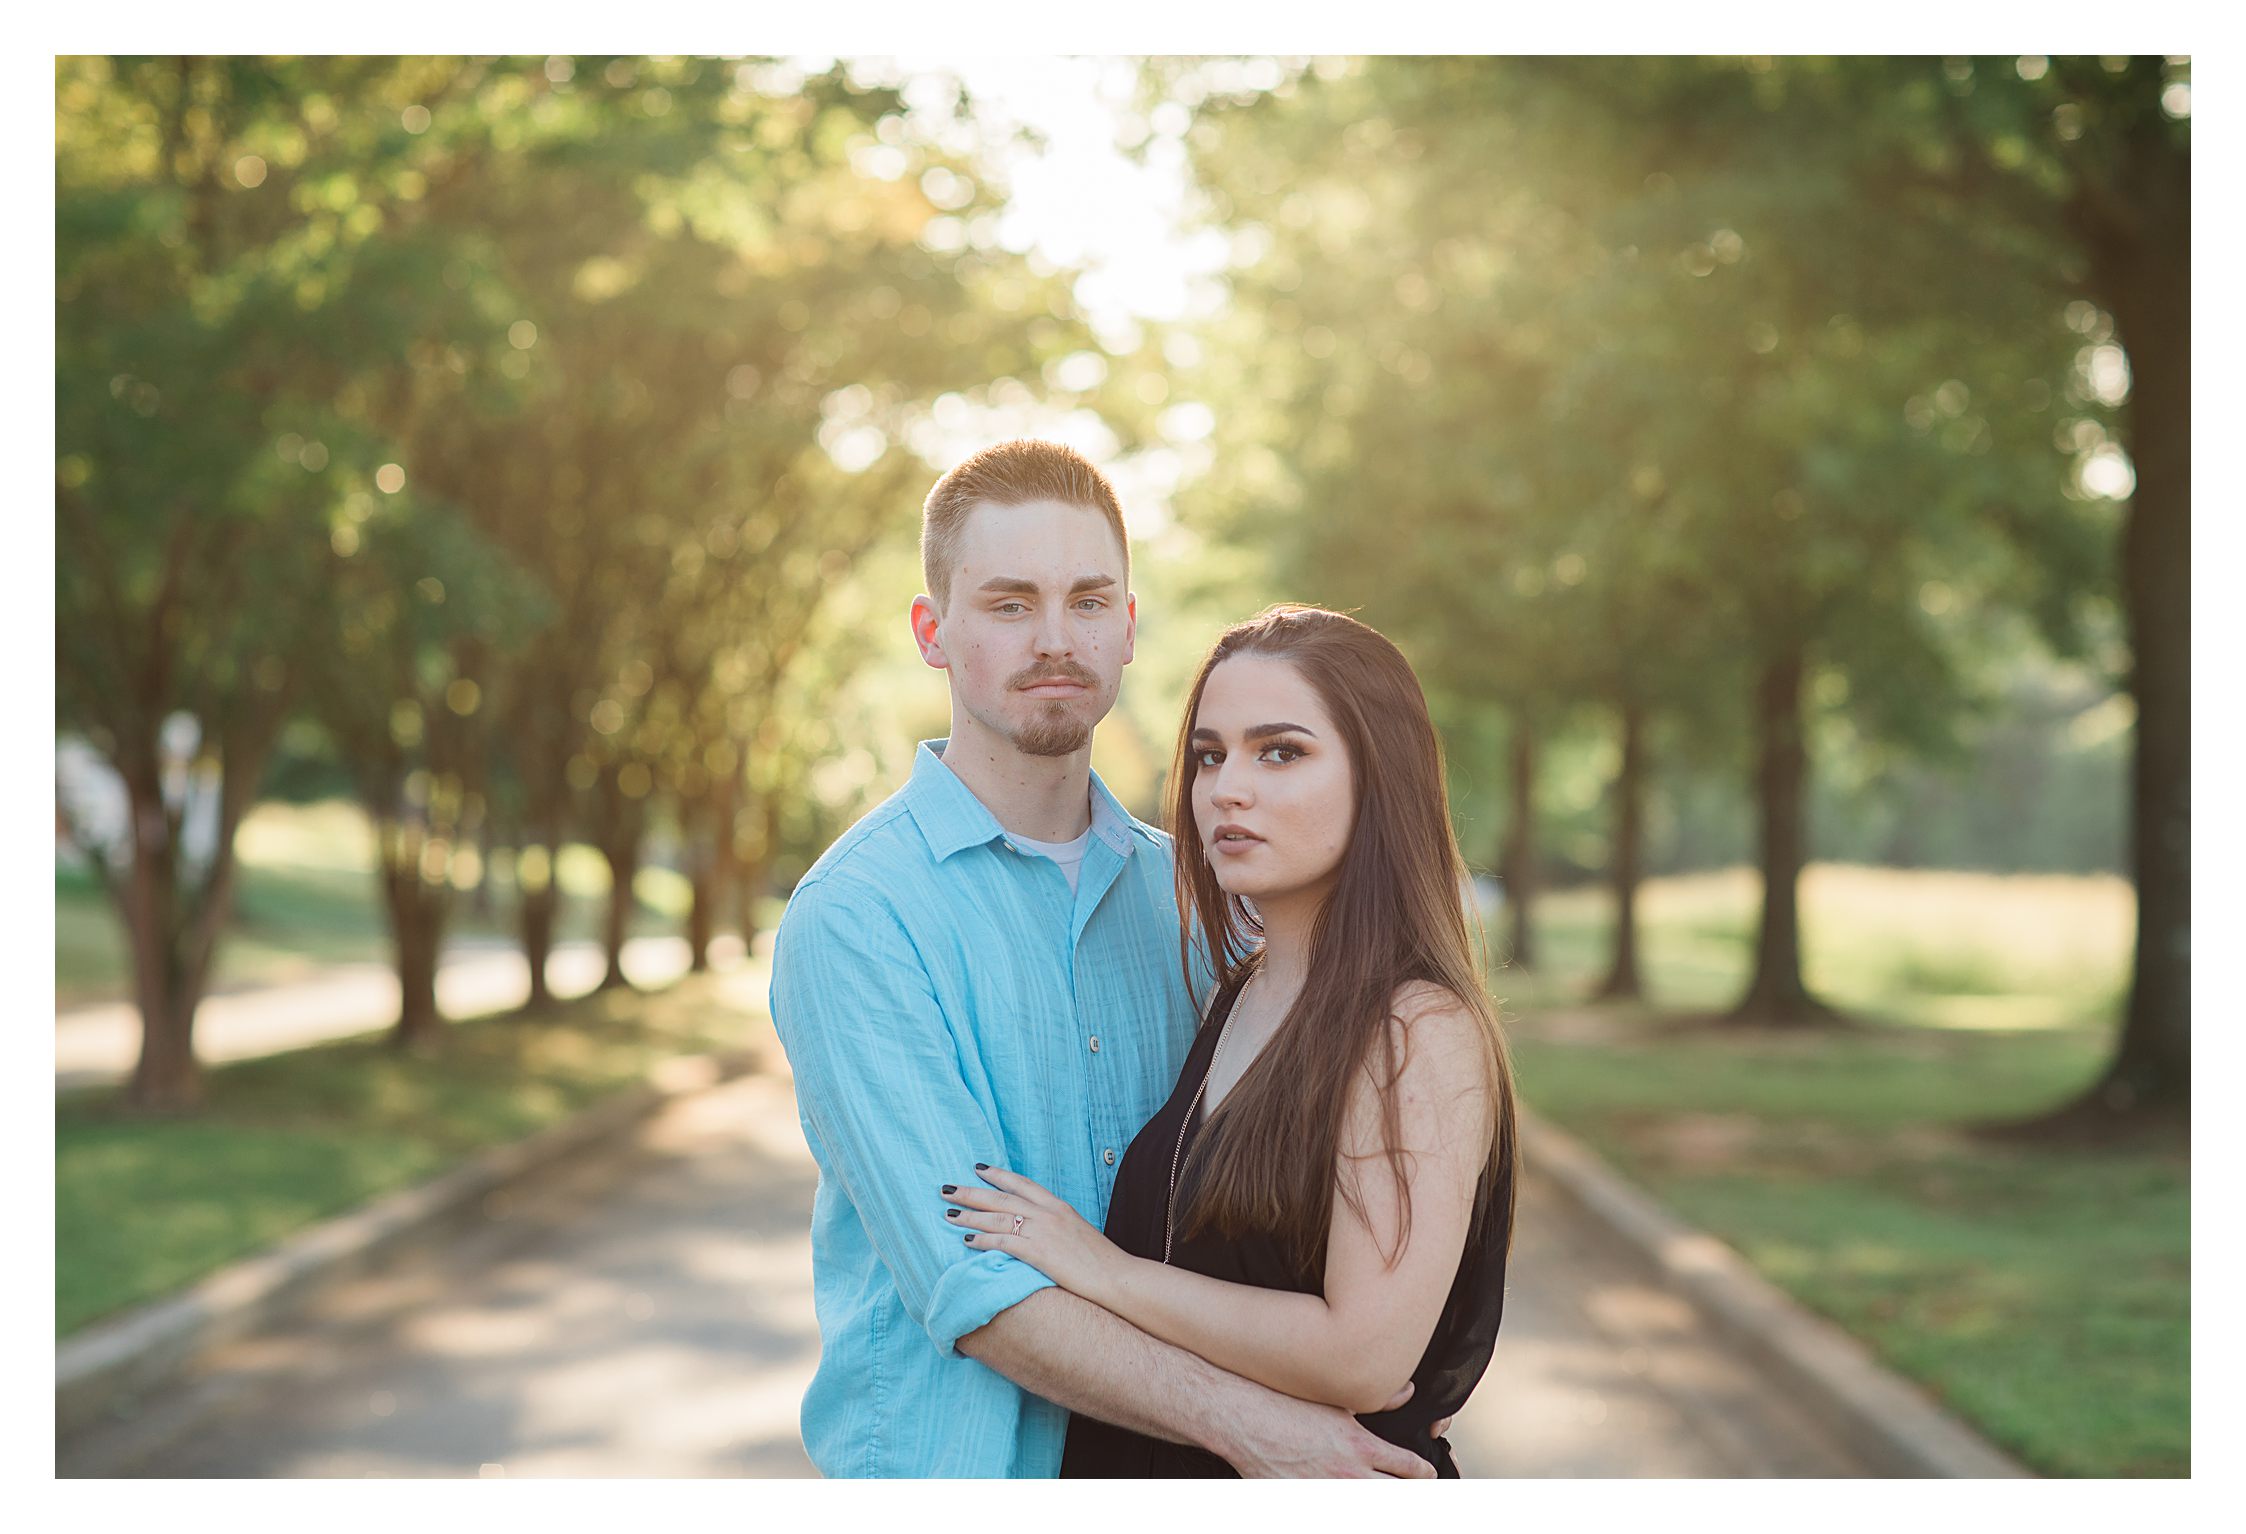 Serious look for engagement photo